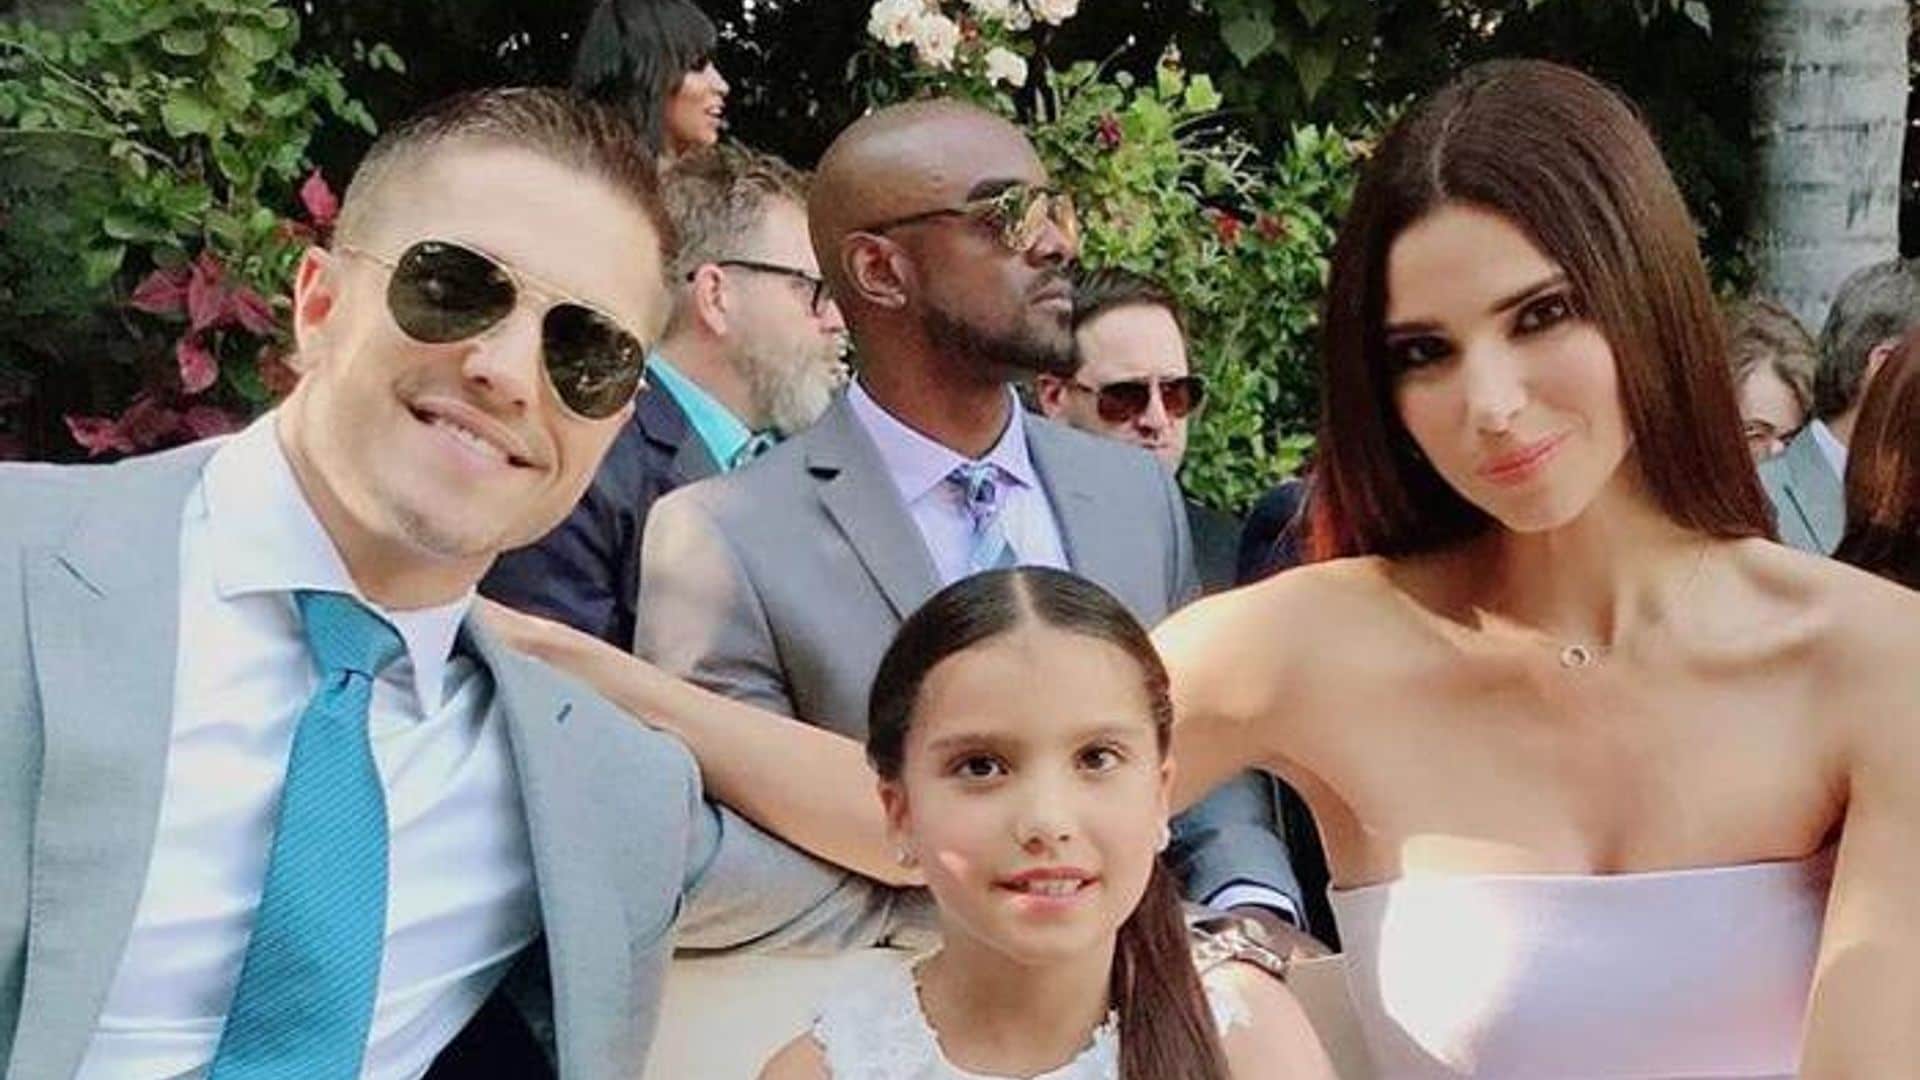 Roselyn Sanchez and Eric Winter attend a wedding and their daughter steals the show